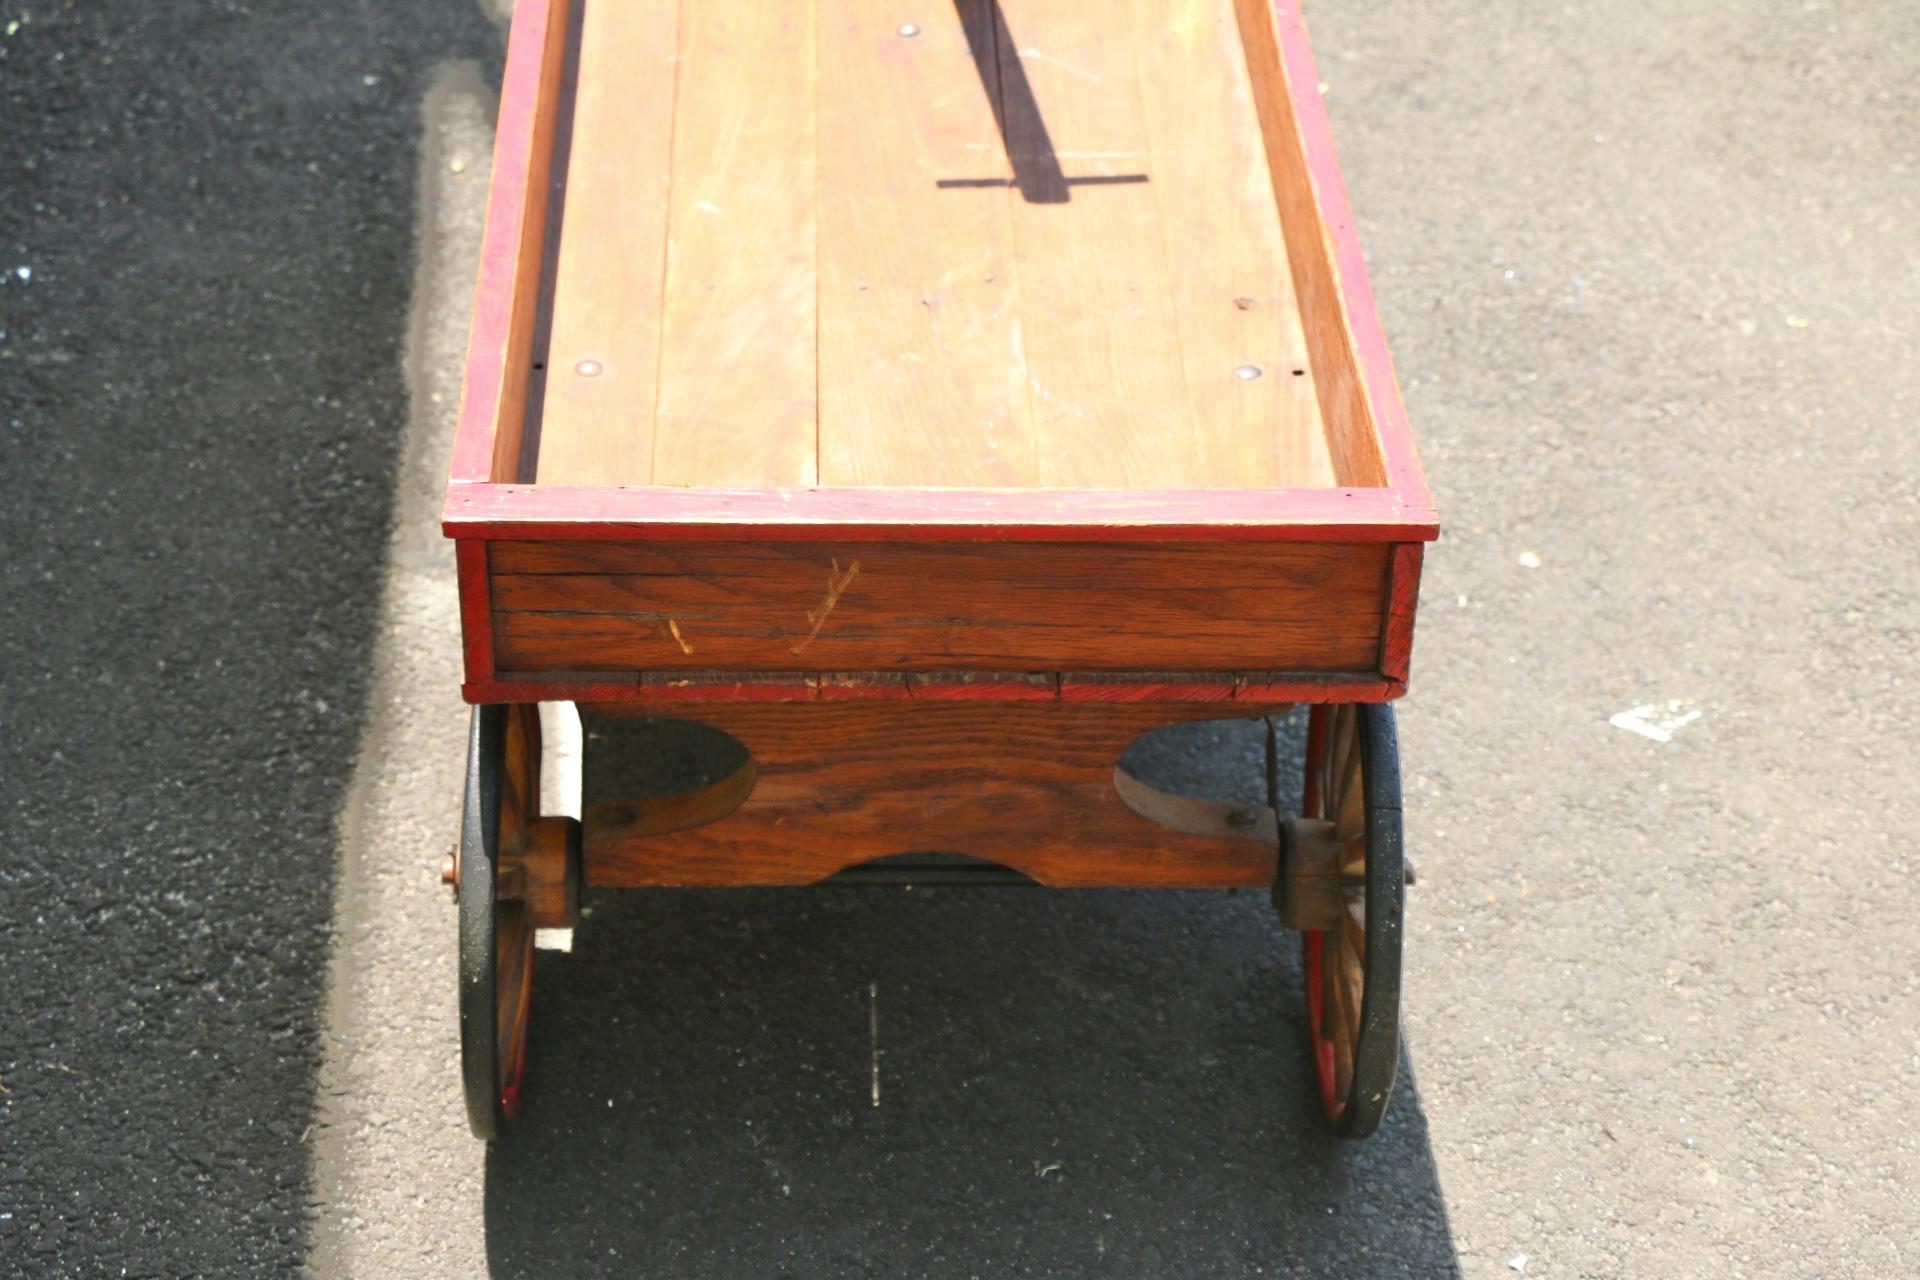 Rustic 1920’s Wooden Wagon